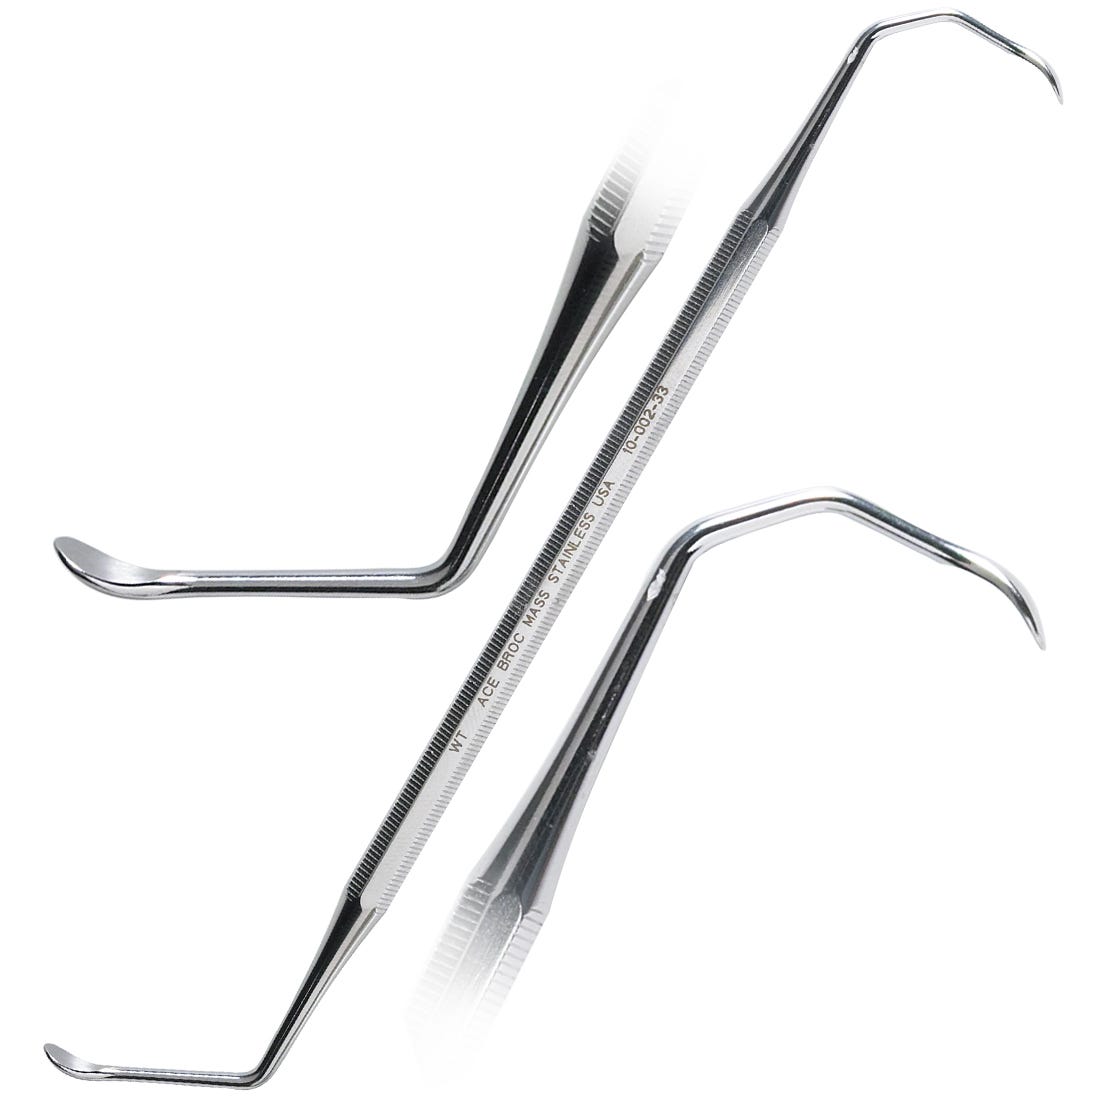 ACE Antral Curette #2, double ended